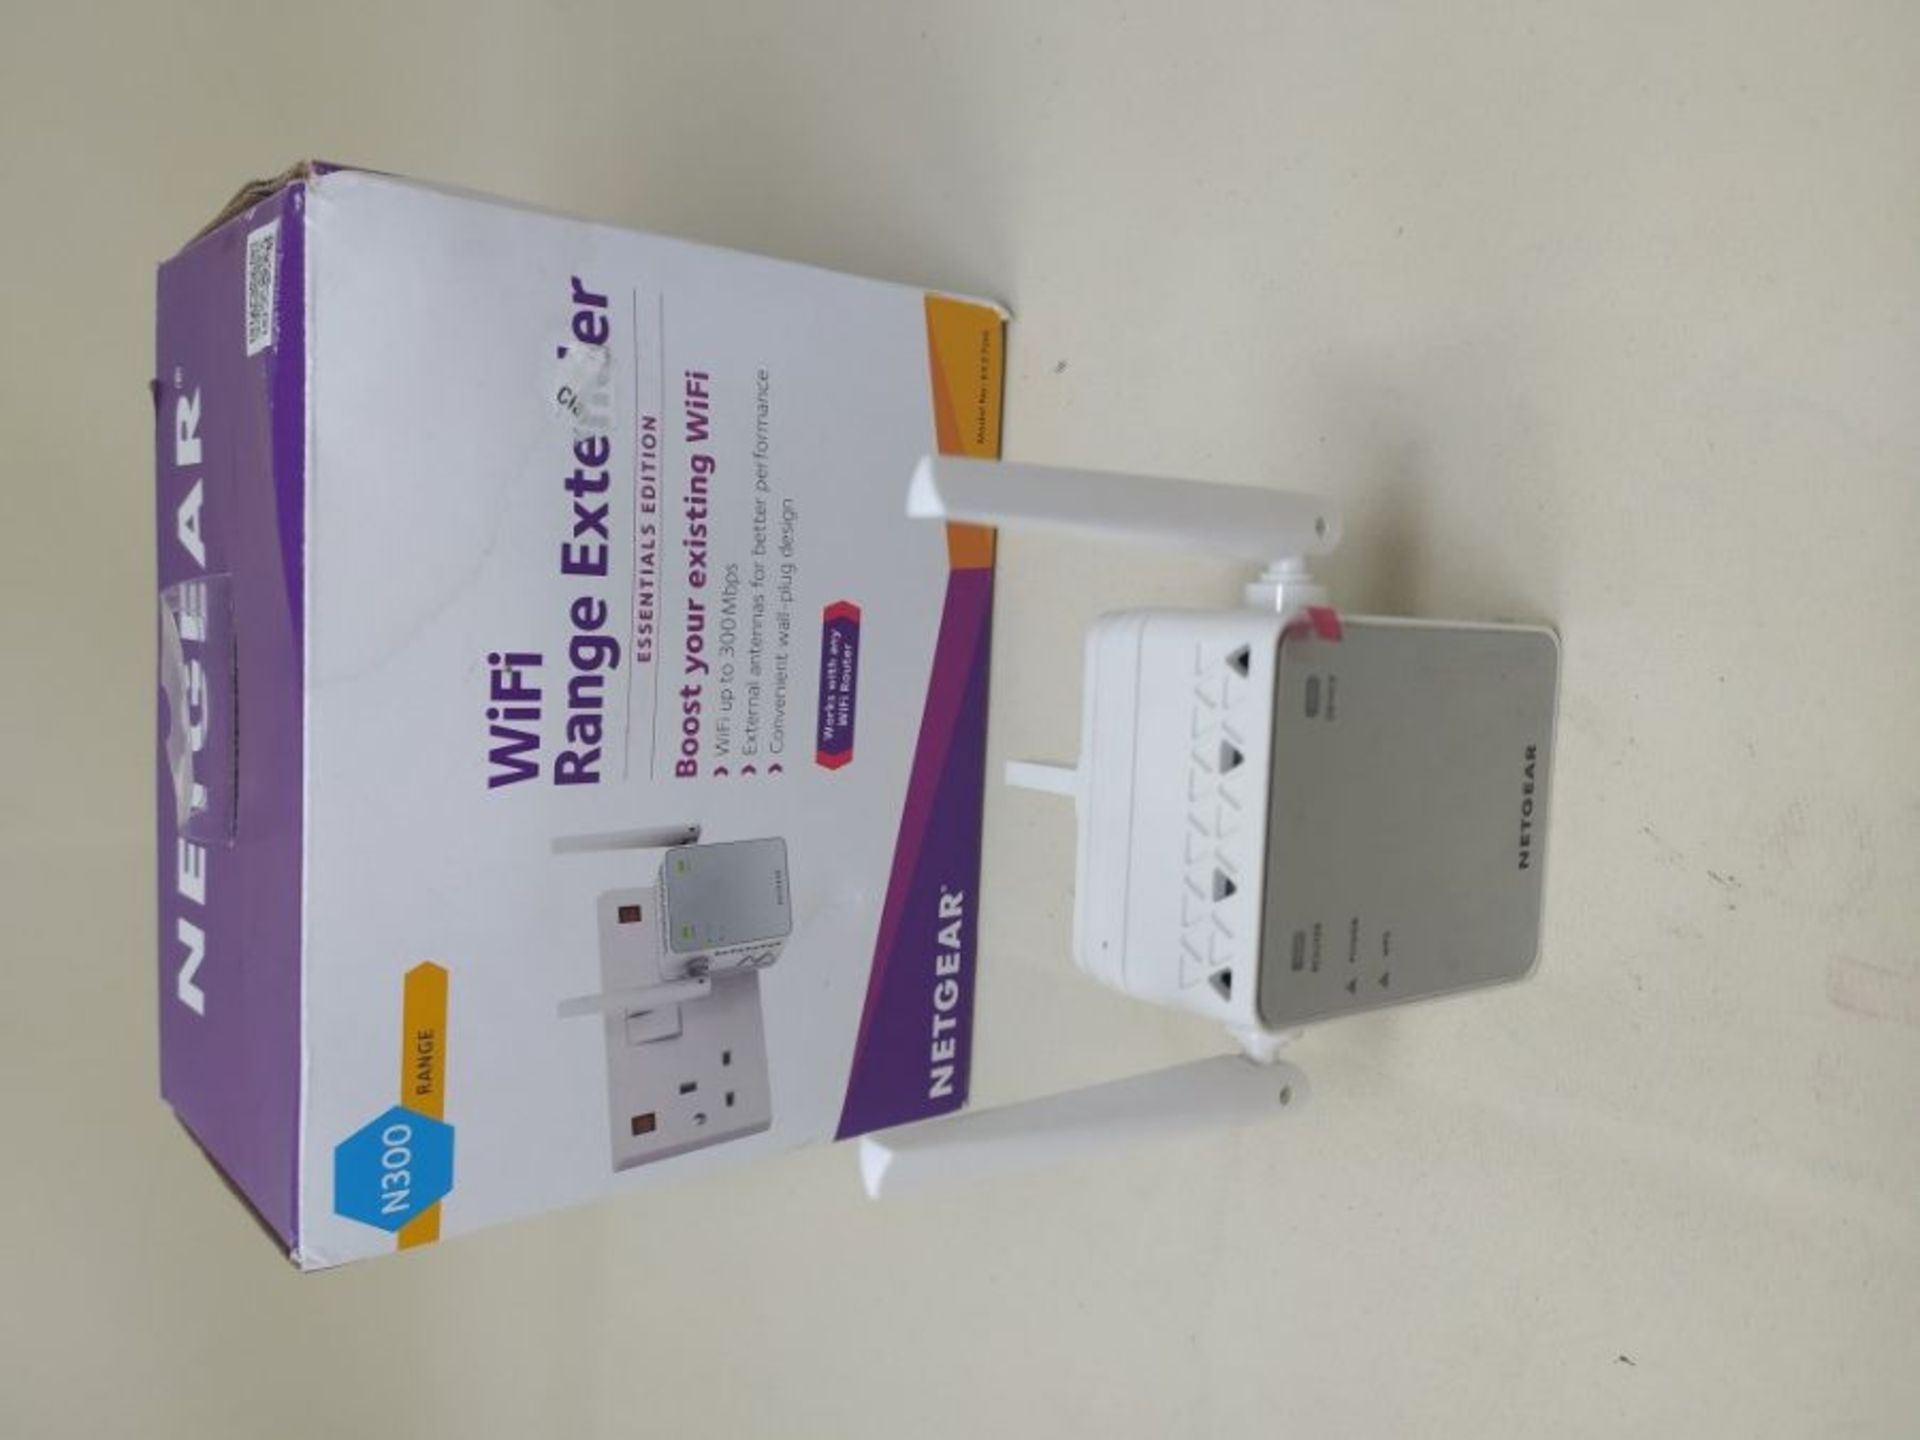 NETGEAR Wi-Fi Range Extender EX2700 - Coverage up to 600 sq.ft. and 10 devices with N3 - Image 2 of 2